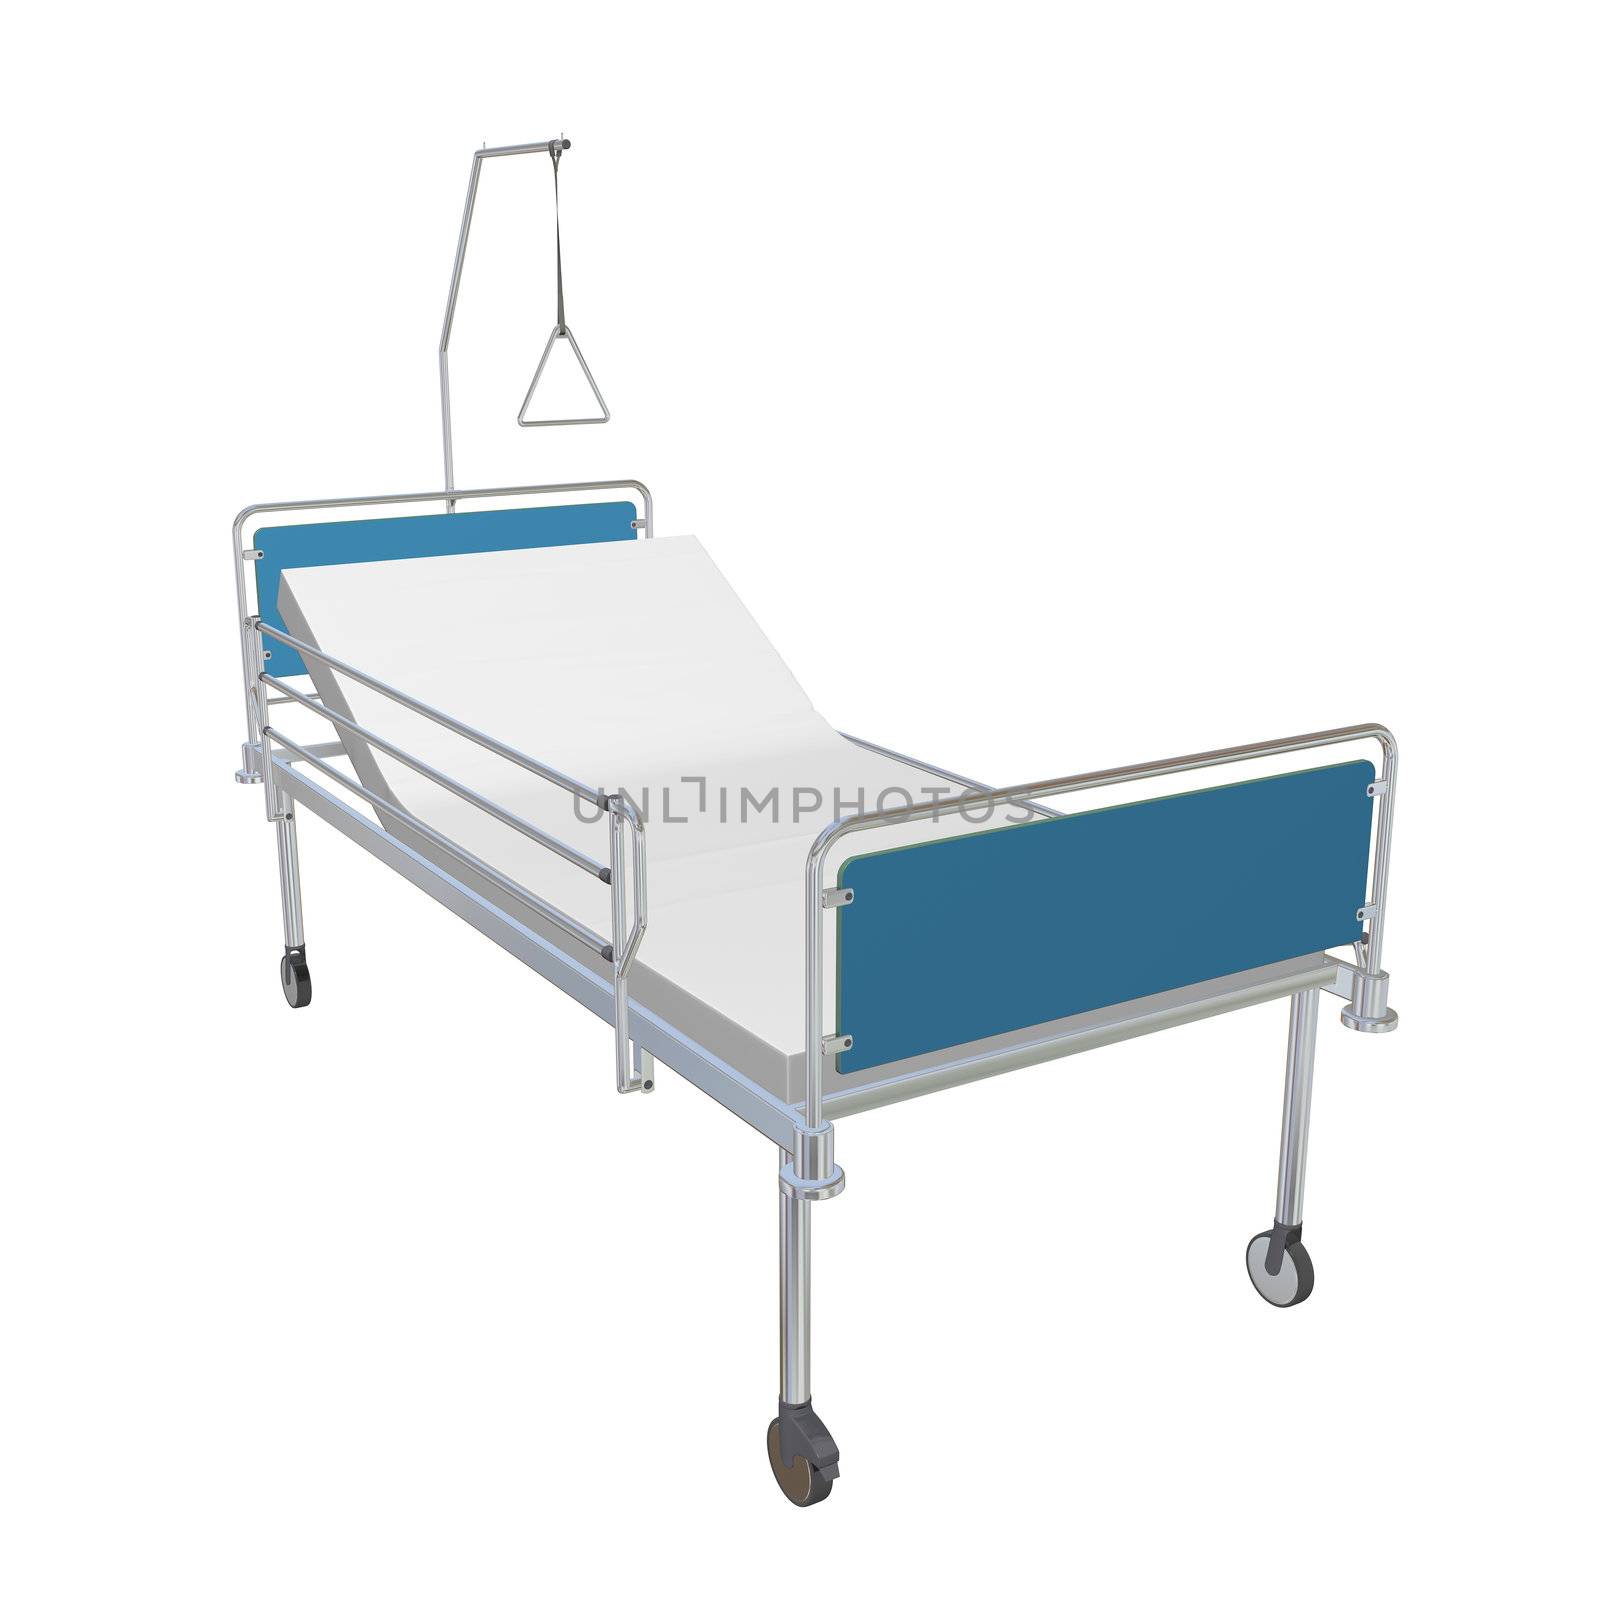 Blue and chrome mobile hospital bed with recliner, 3d illustrati by Morphart